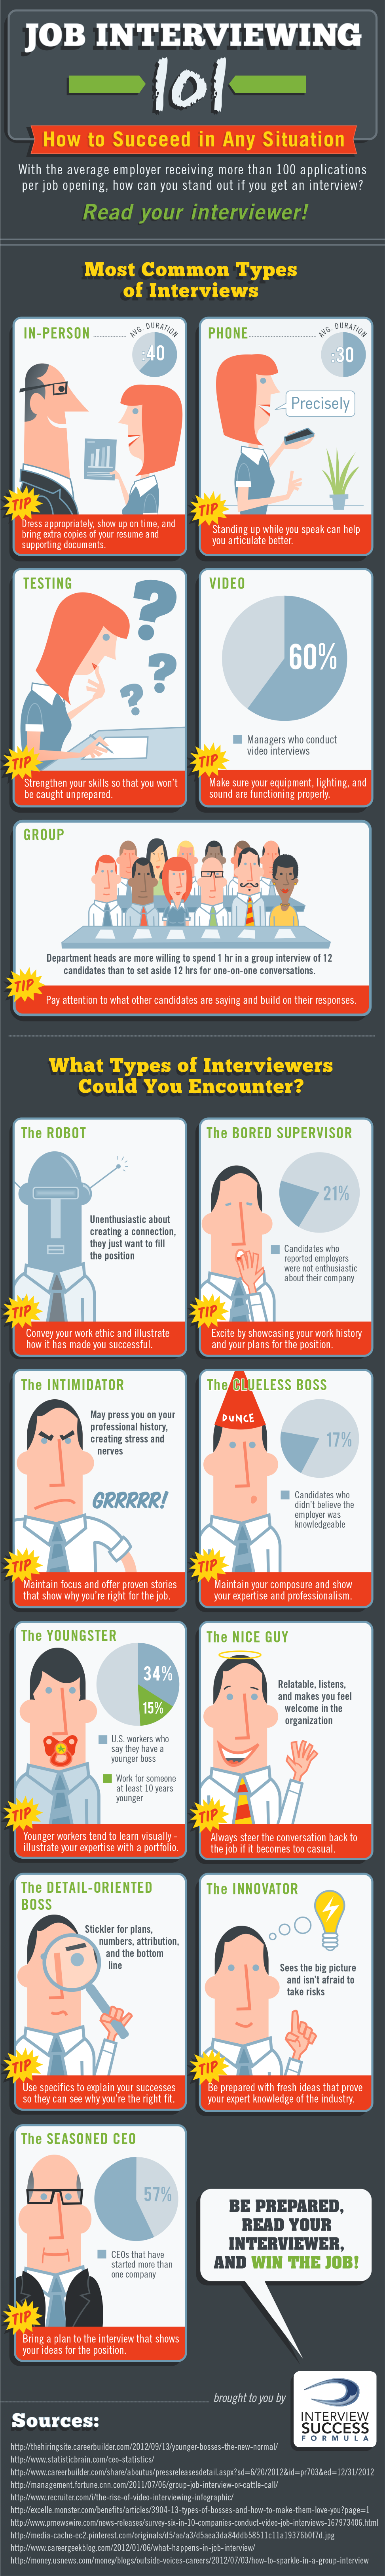 How to Deal with Your Job Interview in Any Situation [INFOGRAPHIC]